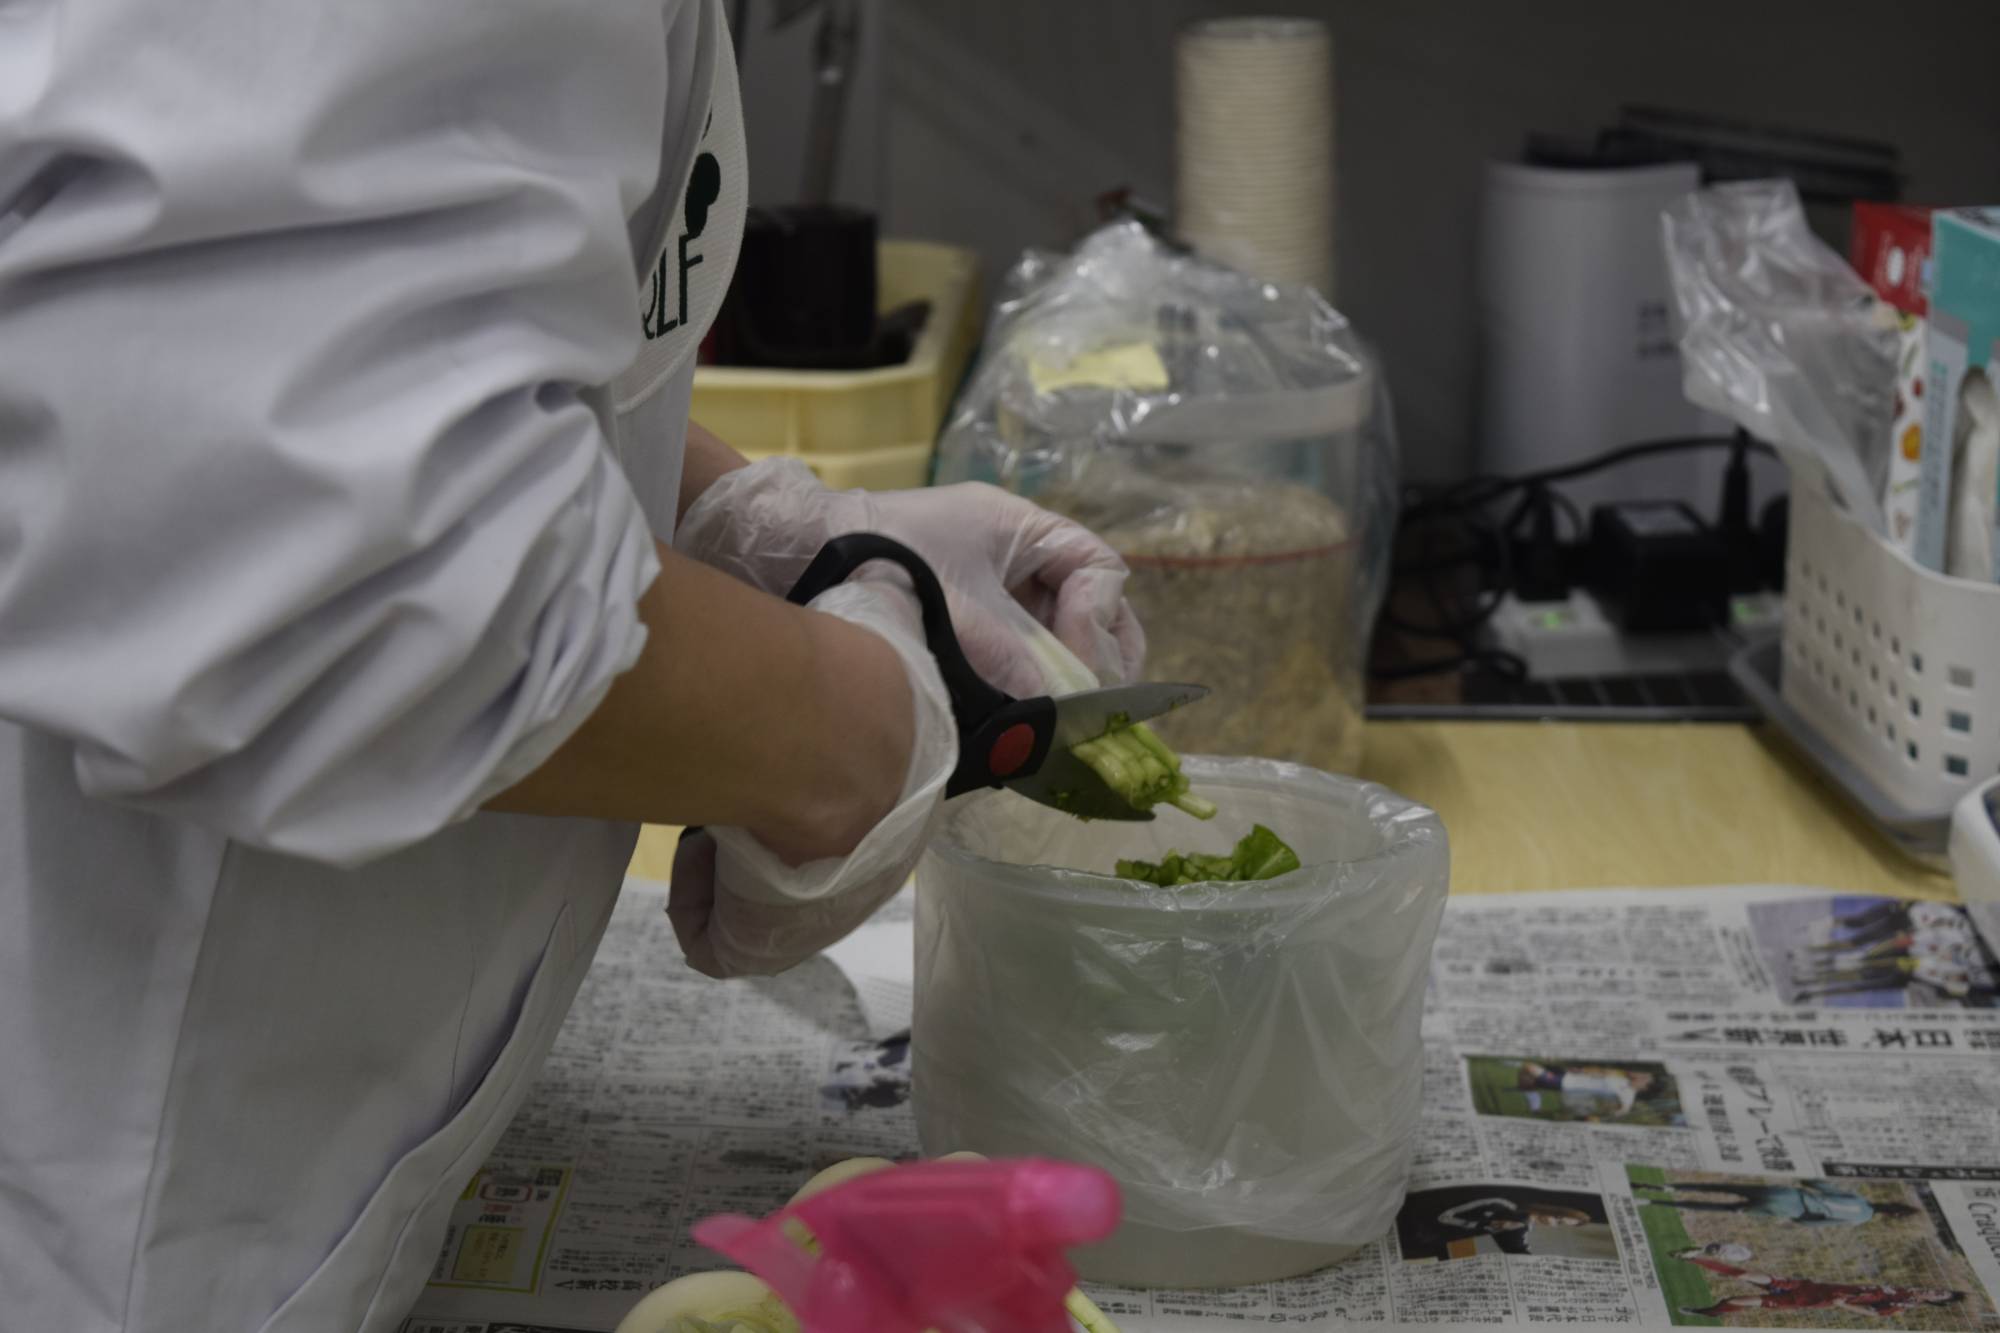 A member of Mothers' Radiation Lab Fukushima cuts green tops off of turnips to measure their radiation level in a lab in Iwaki last month. | KYODO